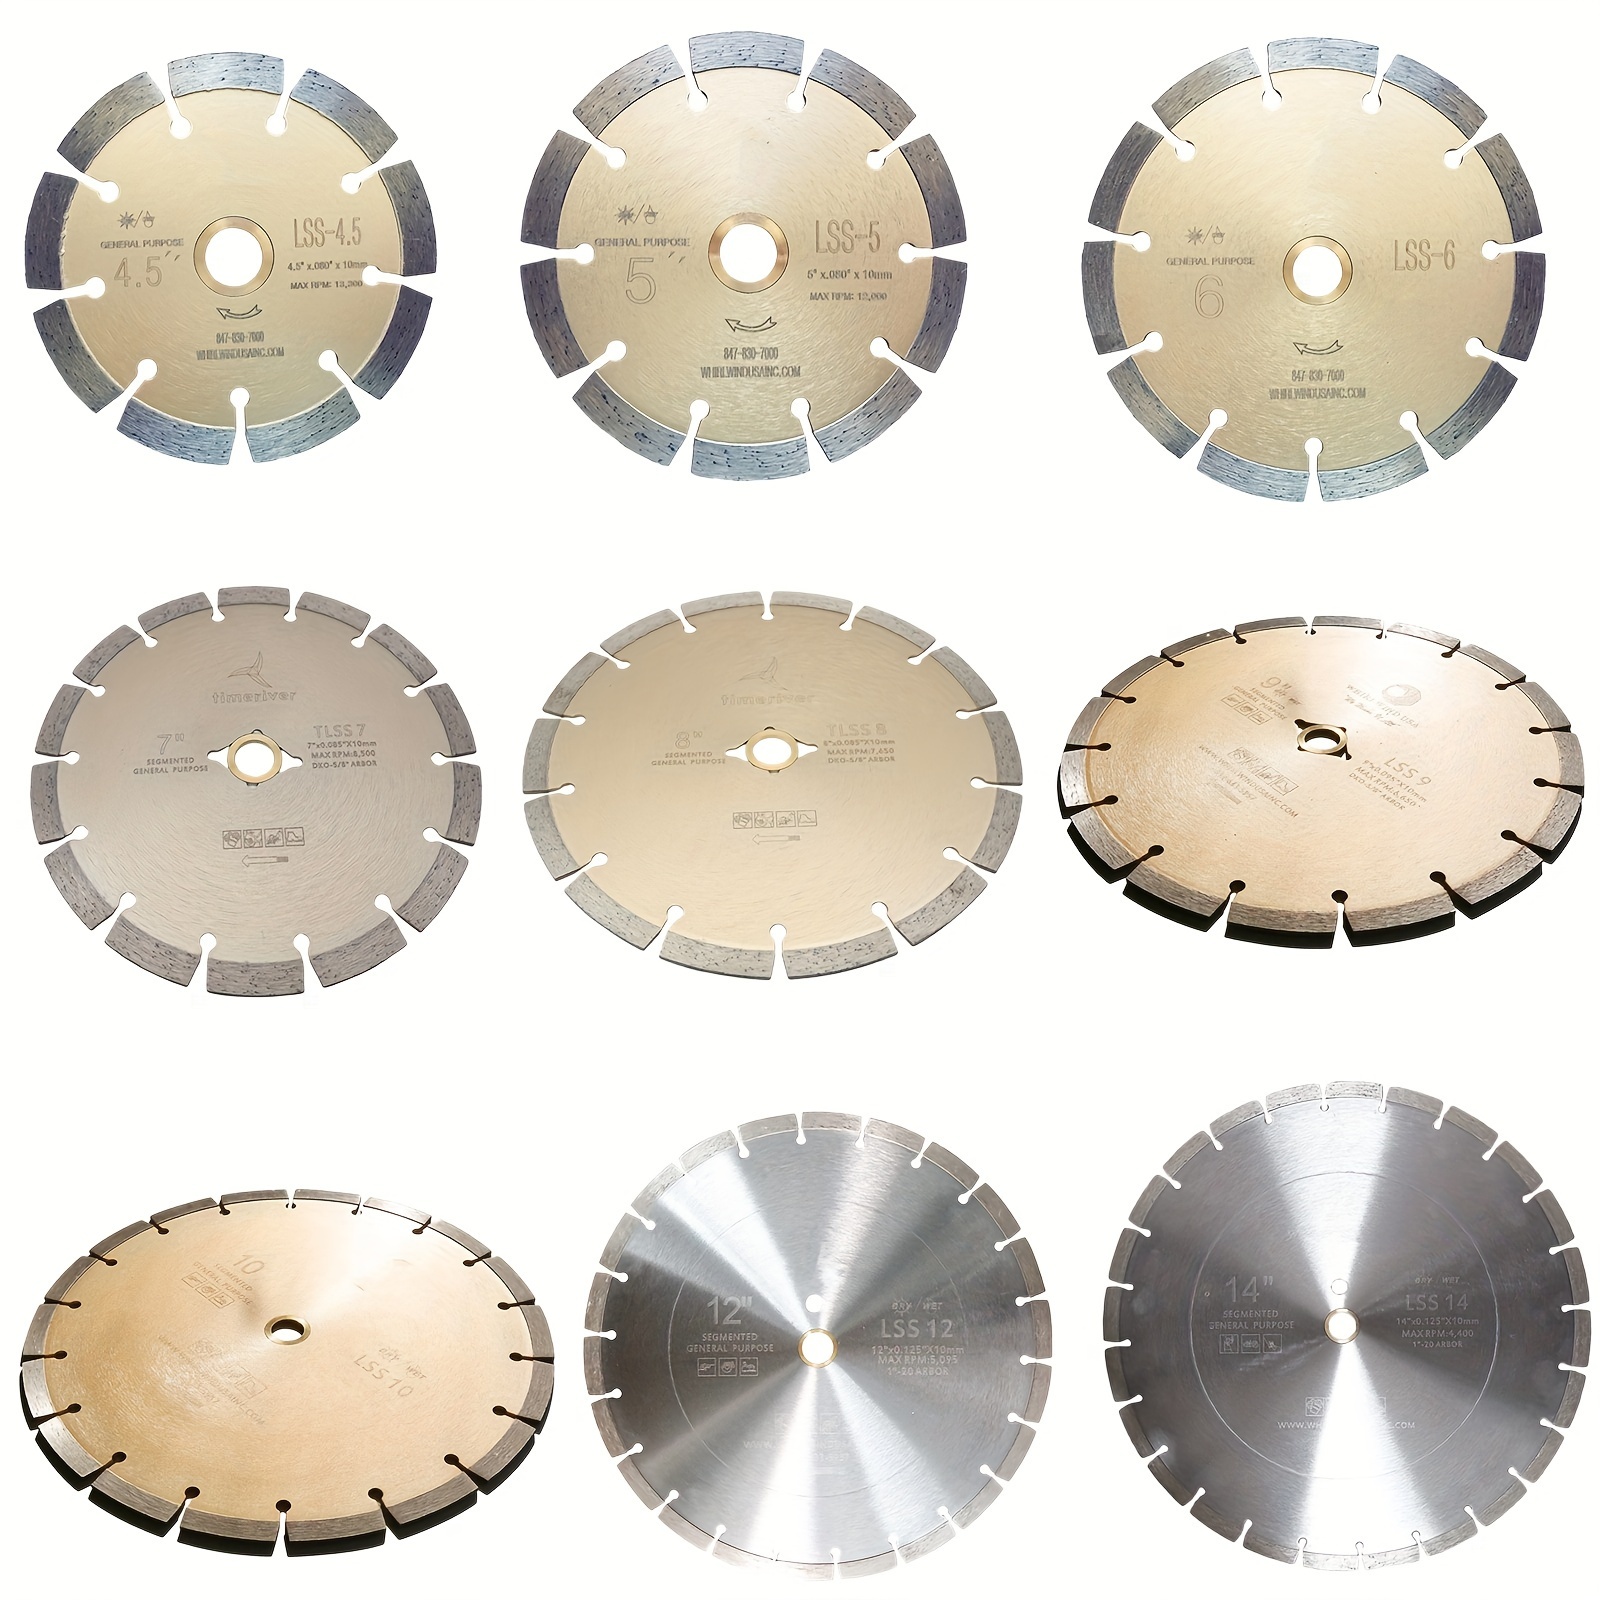 

Concrete Saw Blade, 4.5/5/6/7/8/9/10/12/14 Inch Diamond Blade Concrete With 5/8 Inch Arbor, Dry Or Wet Masonry Blade For Cutting Masonry, Retaining Wall, Granite, Marble, Concrete